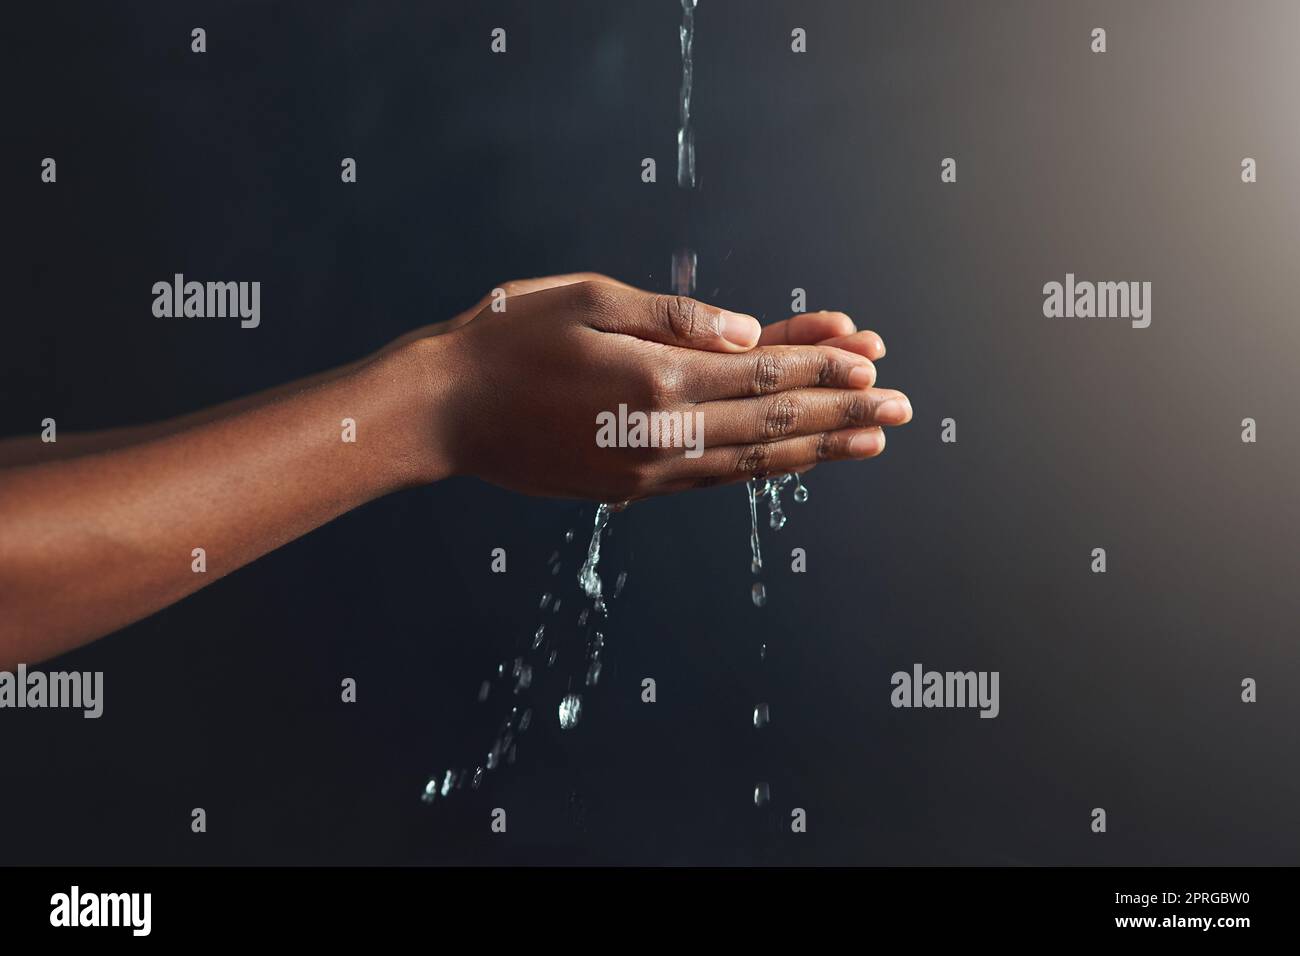 Purity in the palm of your hands. hands held out under a stream of water against a grey background. Stock Photo